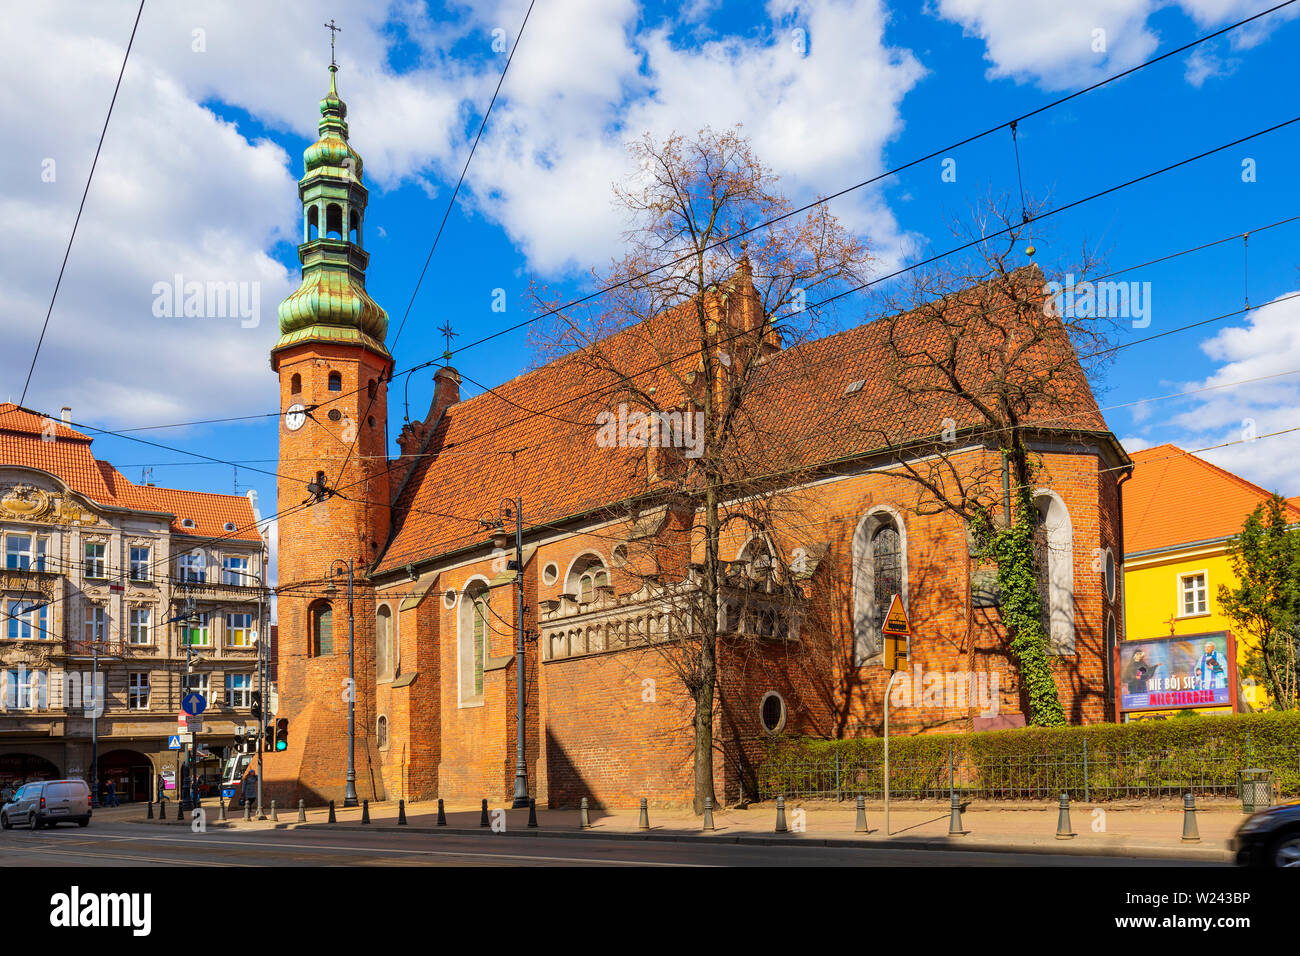 Bydgoszcz, Kujavian-Pomeranian / Poland - 2019/04/01: Exterior of the Poor Clares order church dedicated to the Assumption of the Blessed Virgin Mary Stock Photo